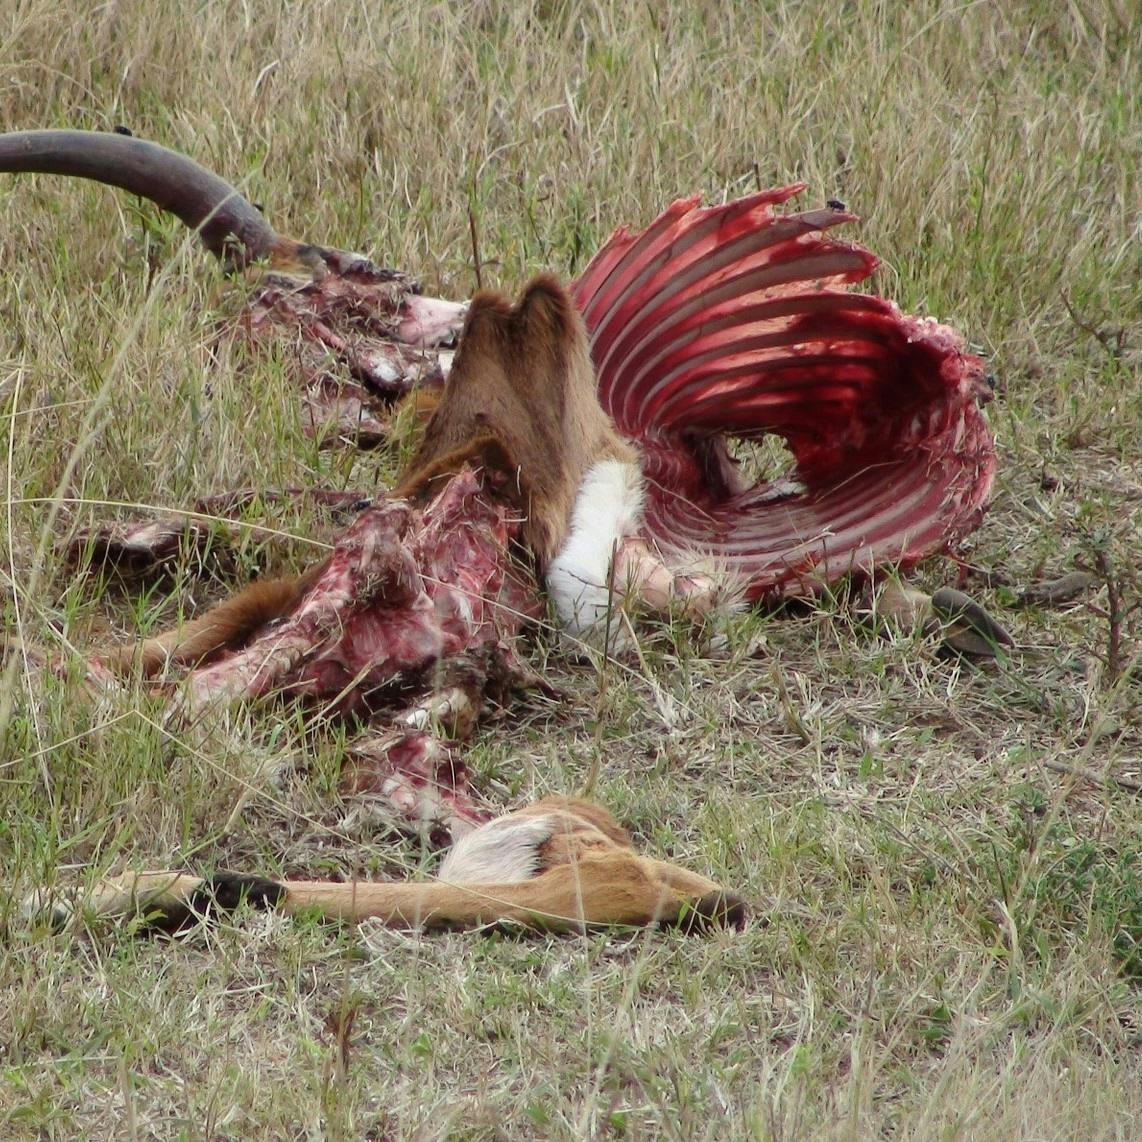 A deer carcass. European brown bears play an important role in culling the weak and cleaning up dead animal carcasses